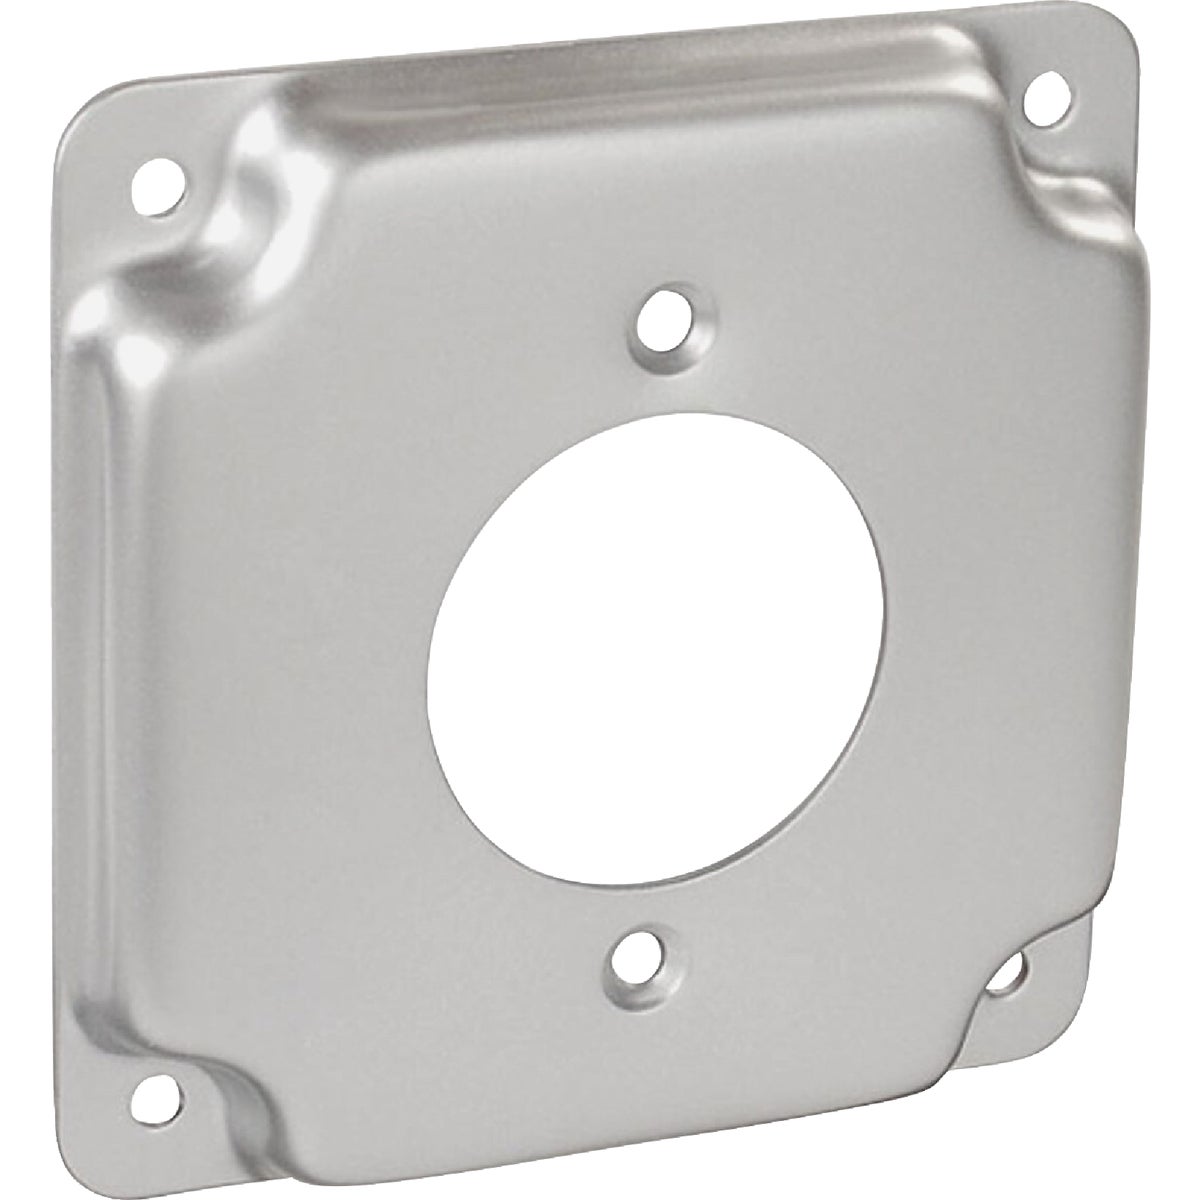 Item 509477, Square industrial surface cover used to close a 4 In.